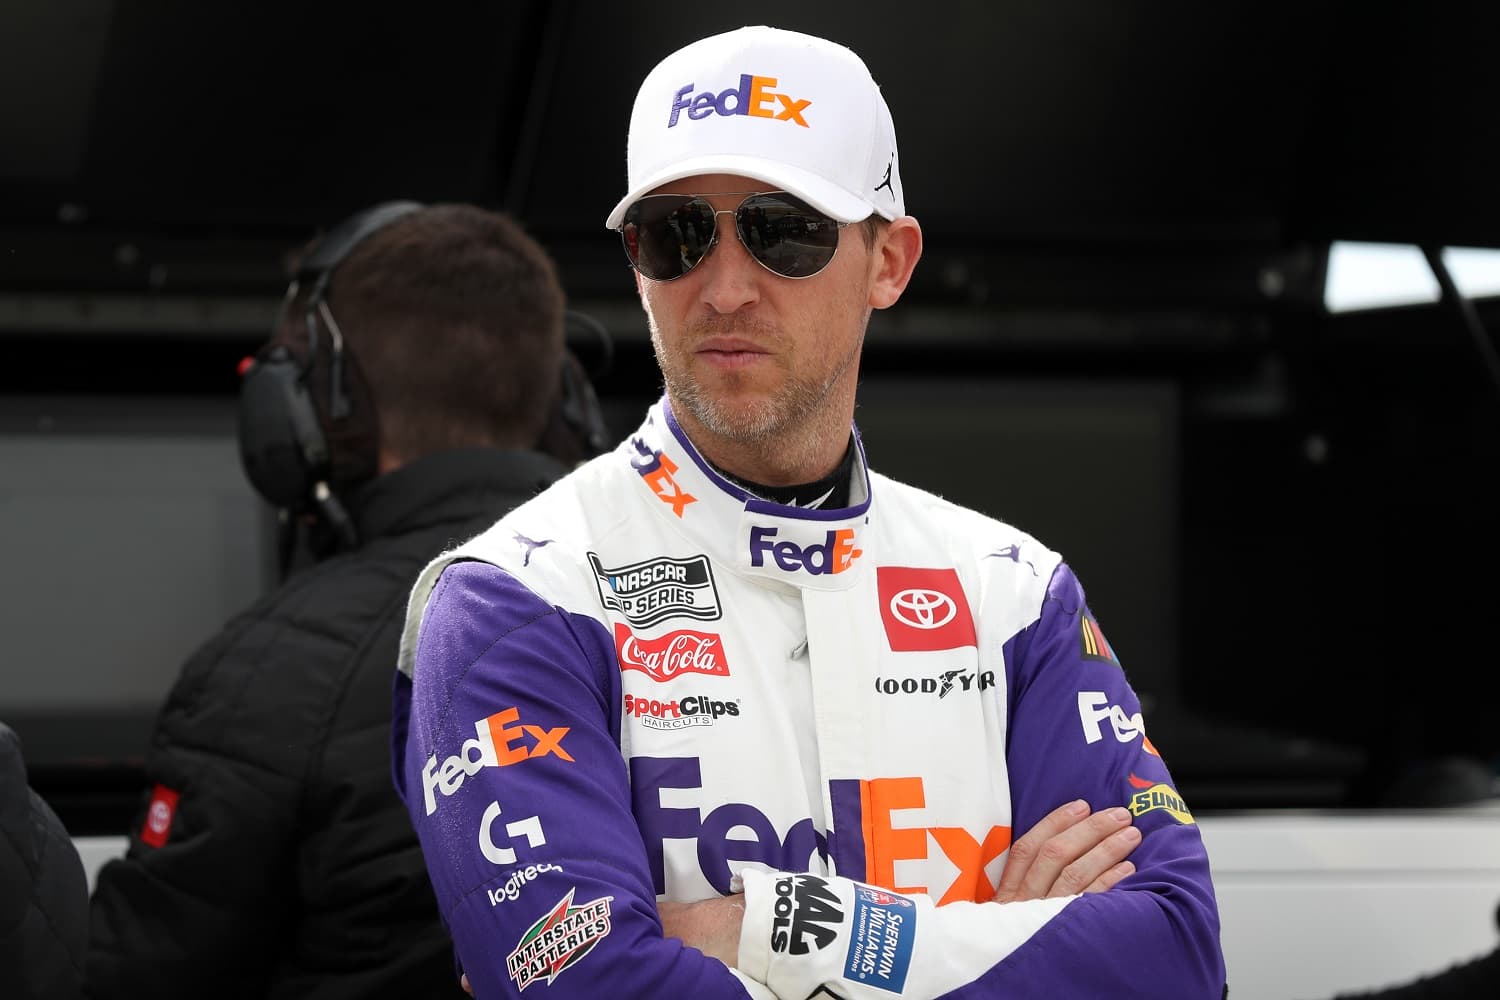 Denny Hamlin waits on the grid during practice for the NASCAR Cup Series Pennzoil 400 at Las Vegas Motor Speedway on March 4, 2023.